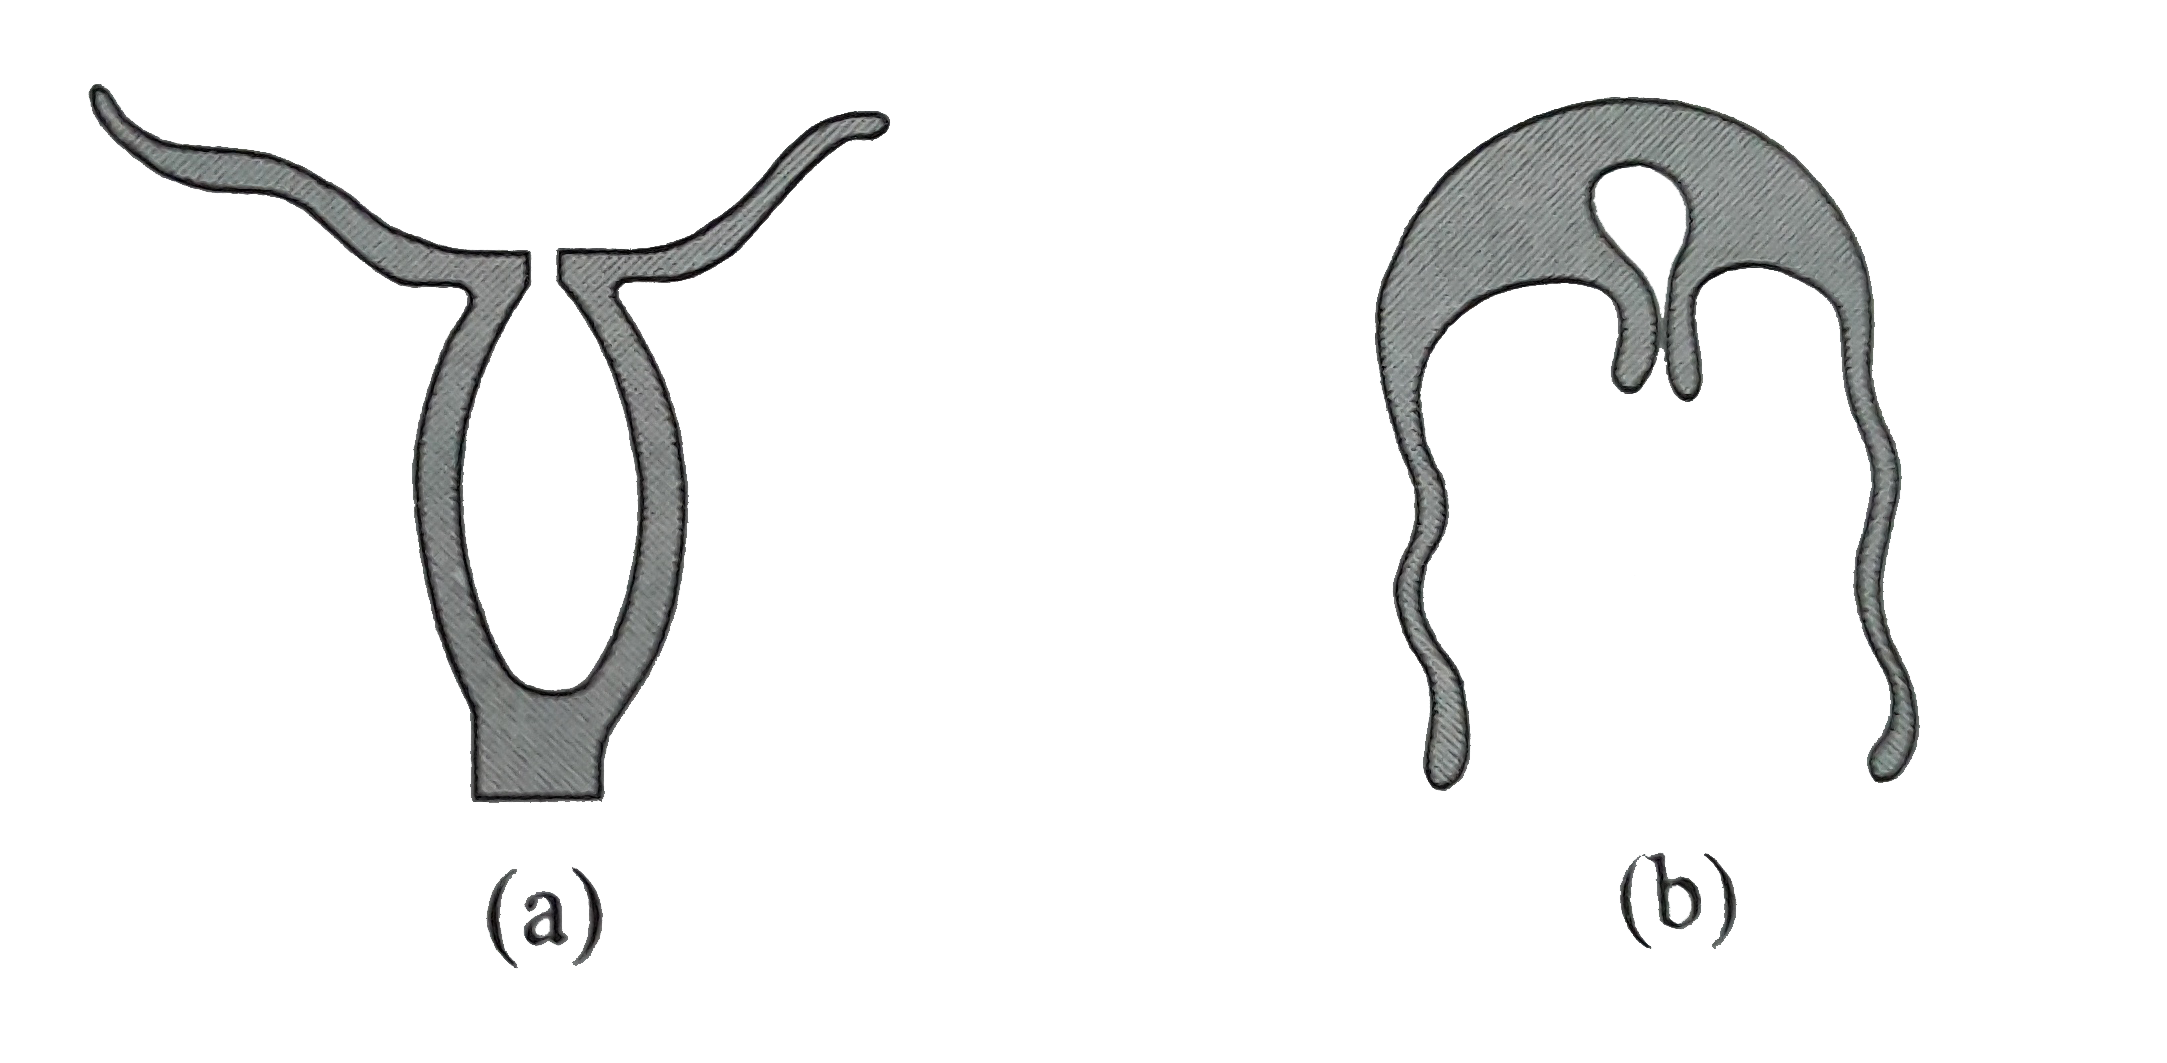 Two figures are given below. Select the correct statement .      (a) Both figures represent the outline of body form of porifera. 

(b) Figure (a) indicates Adamsia and (b) indicates Aurelia 

(c) Figure (a) represent polyp and (b) represent medusa. 

(d) Both (b) and ( c) are correct.